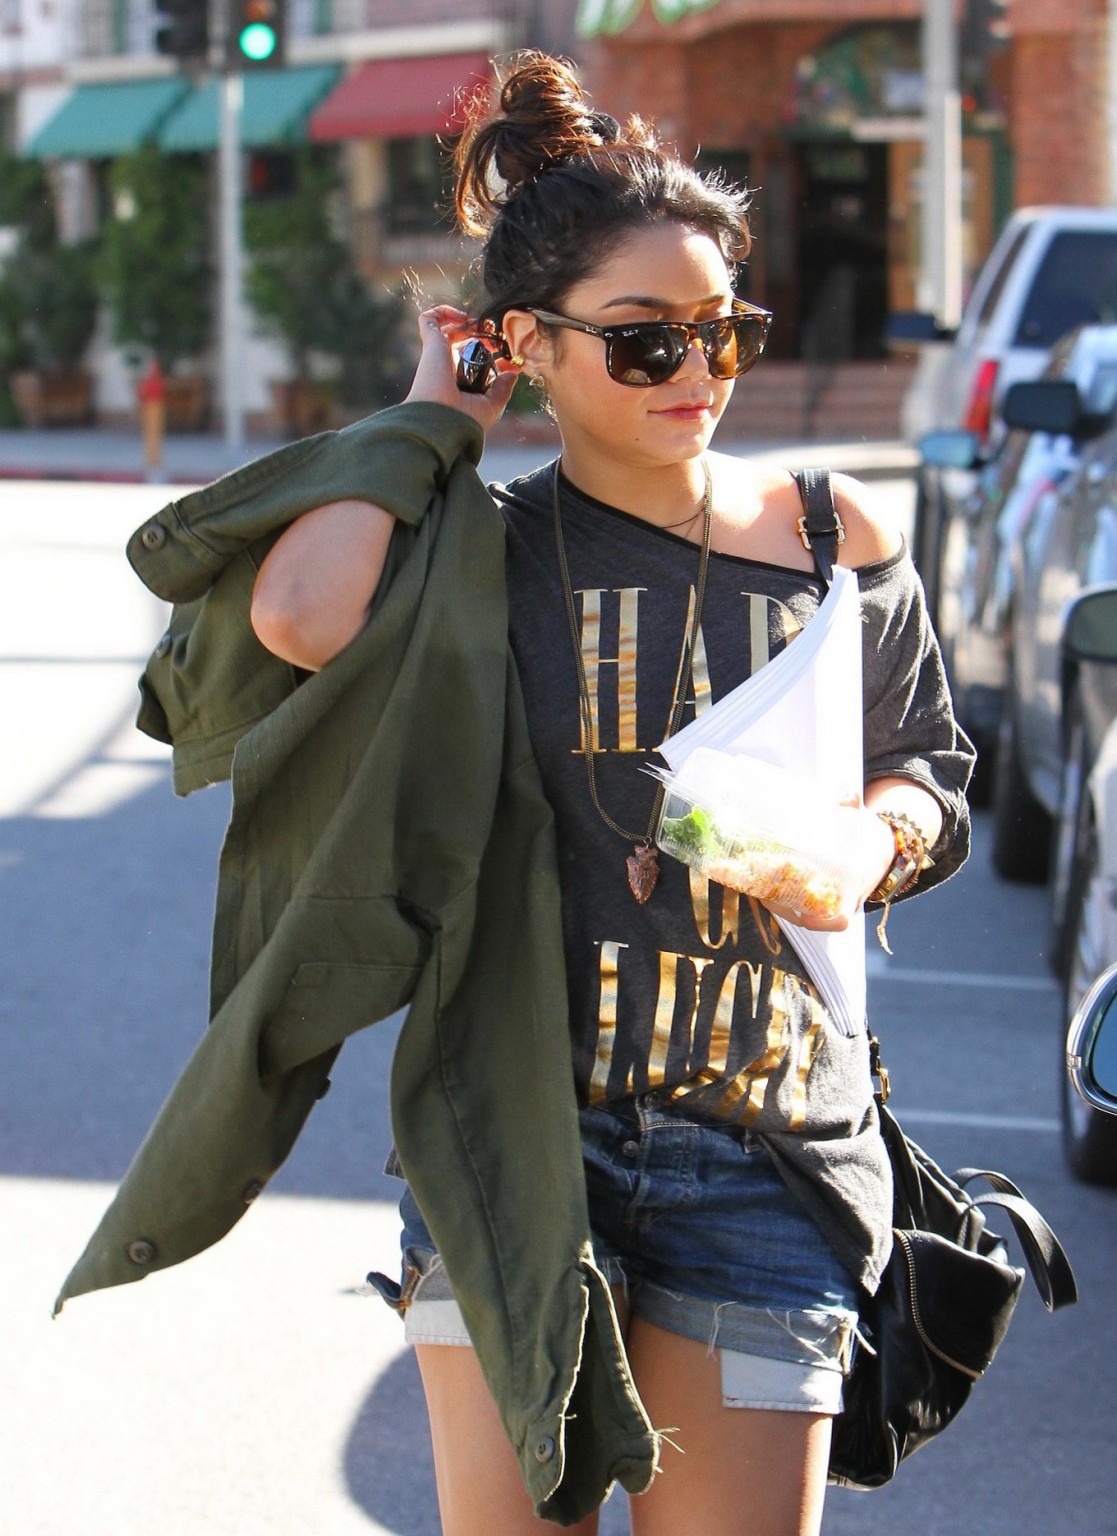 Vanessa hudgens leggy wearing hotpants fuckme boots out in hollywood
 #75276901